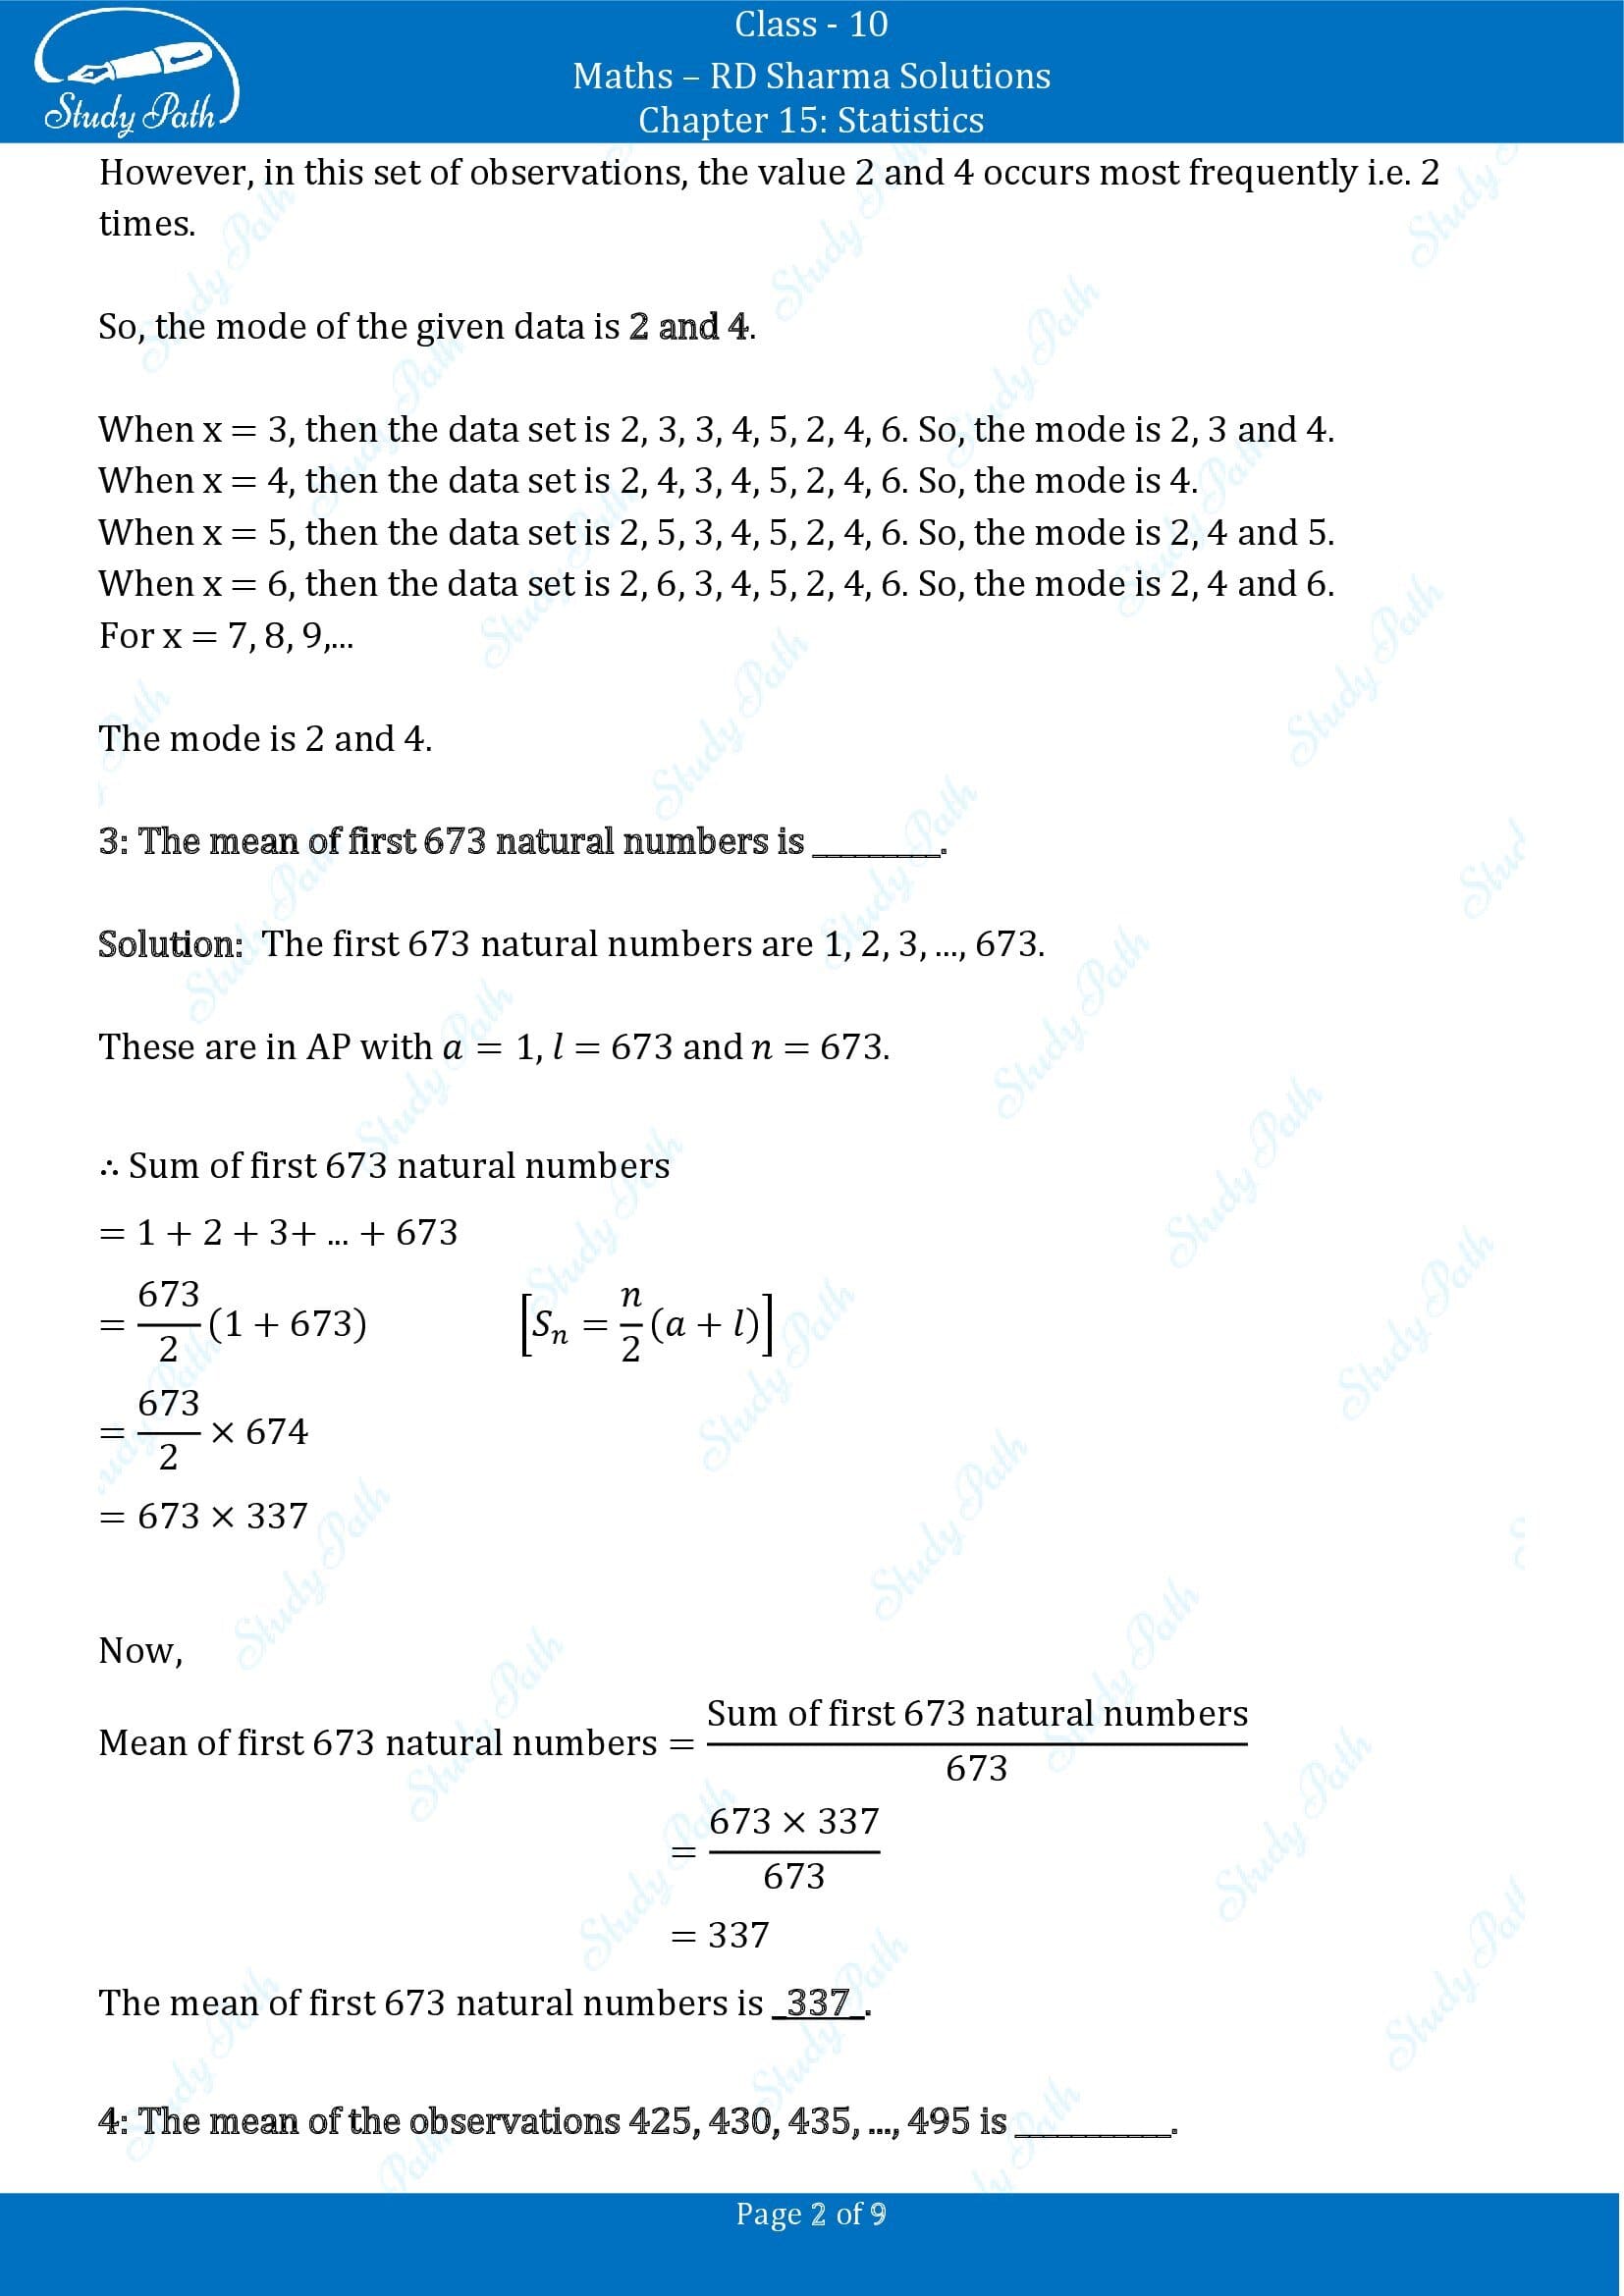 RD Sharma Solutions Class 10 Chapter 15 Statistics Fill in the Blank Type Questions FBQs 00002